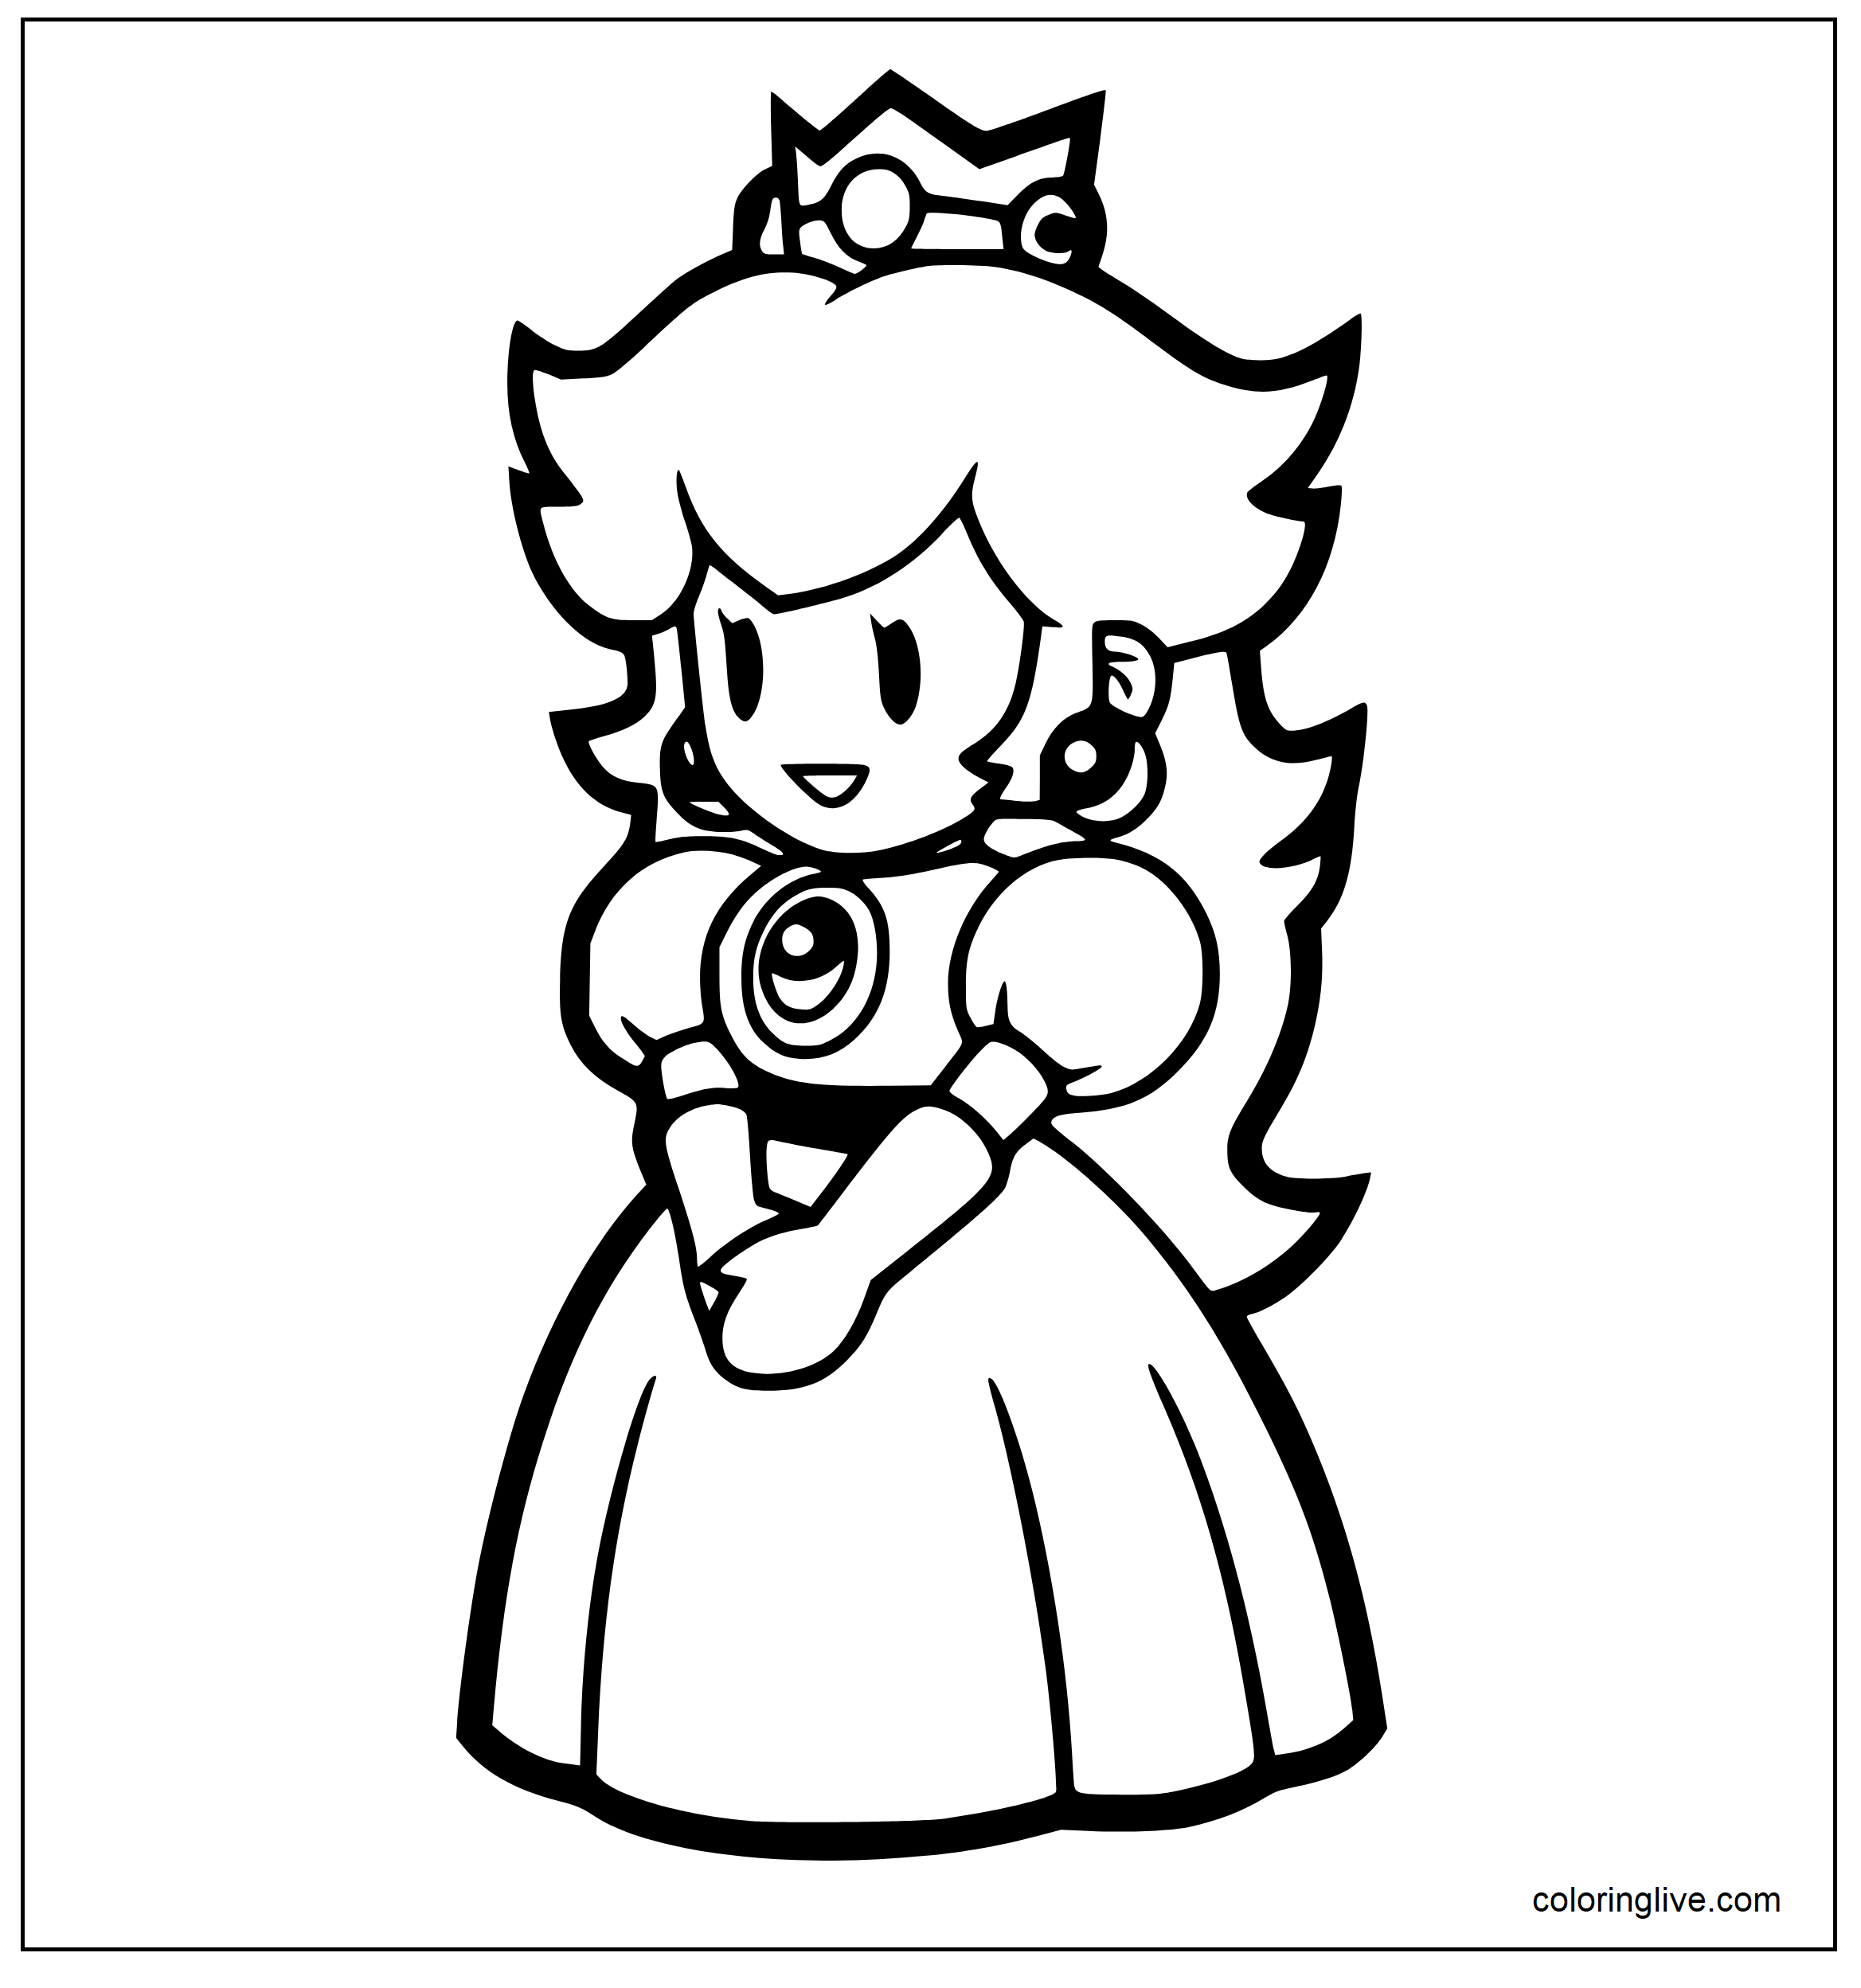 Printable Cute Princess Peach Coloring Page for kids.